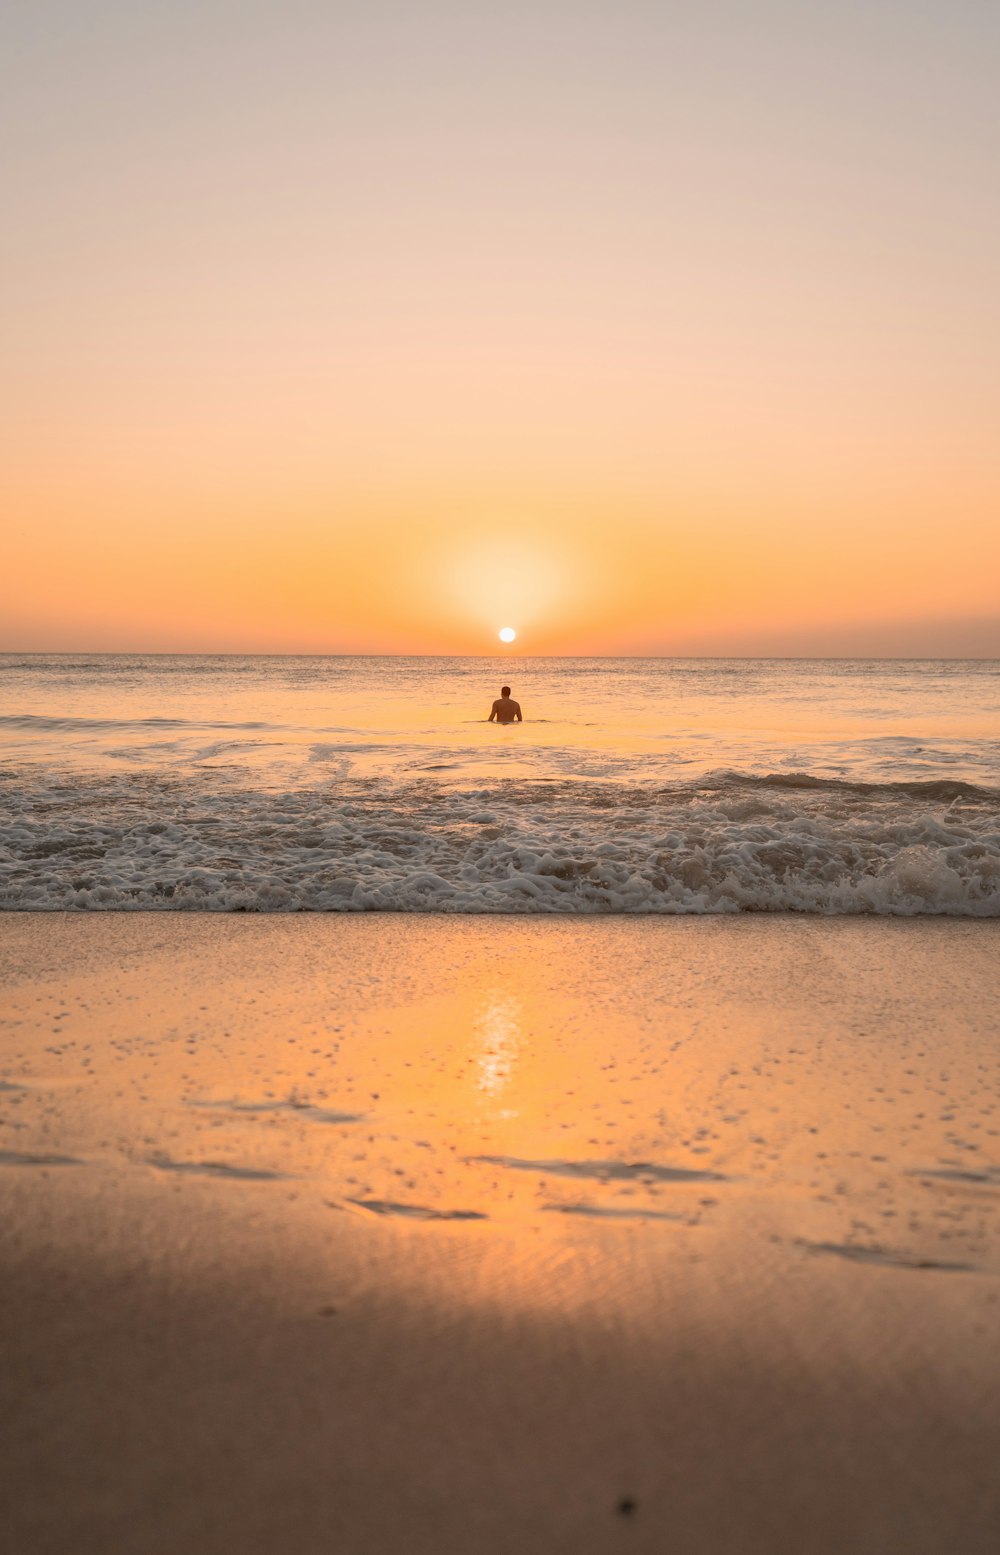 a person riding a horse on the beach at sunset